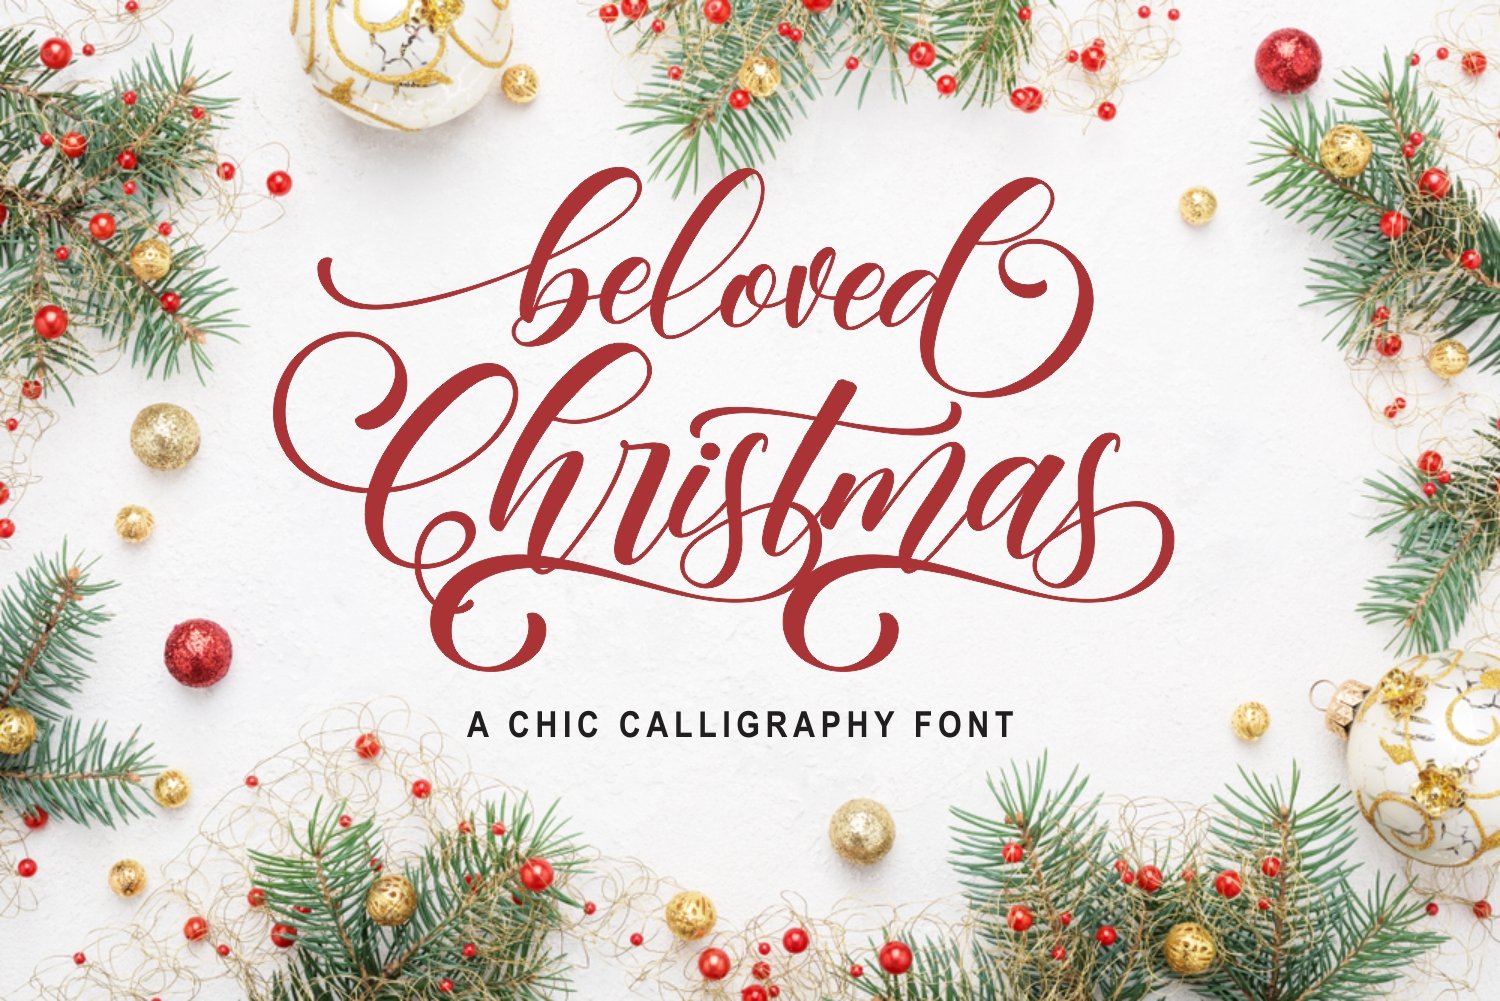 Beloved Christmas cover image.